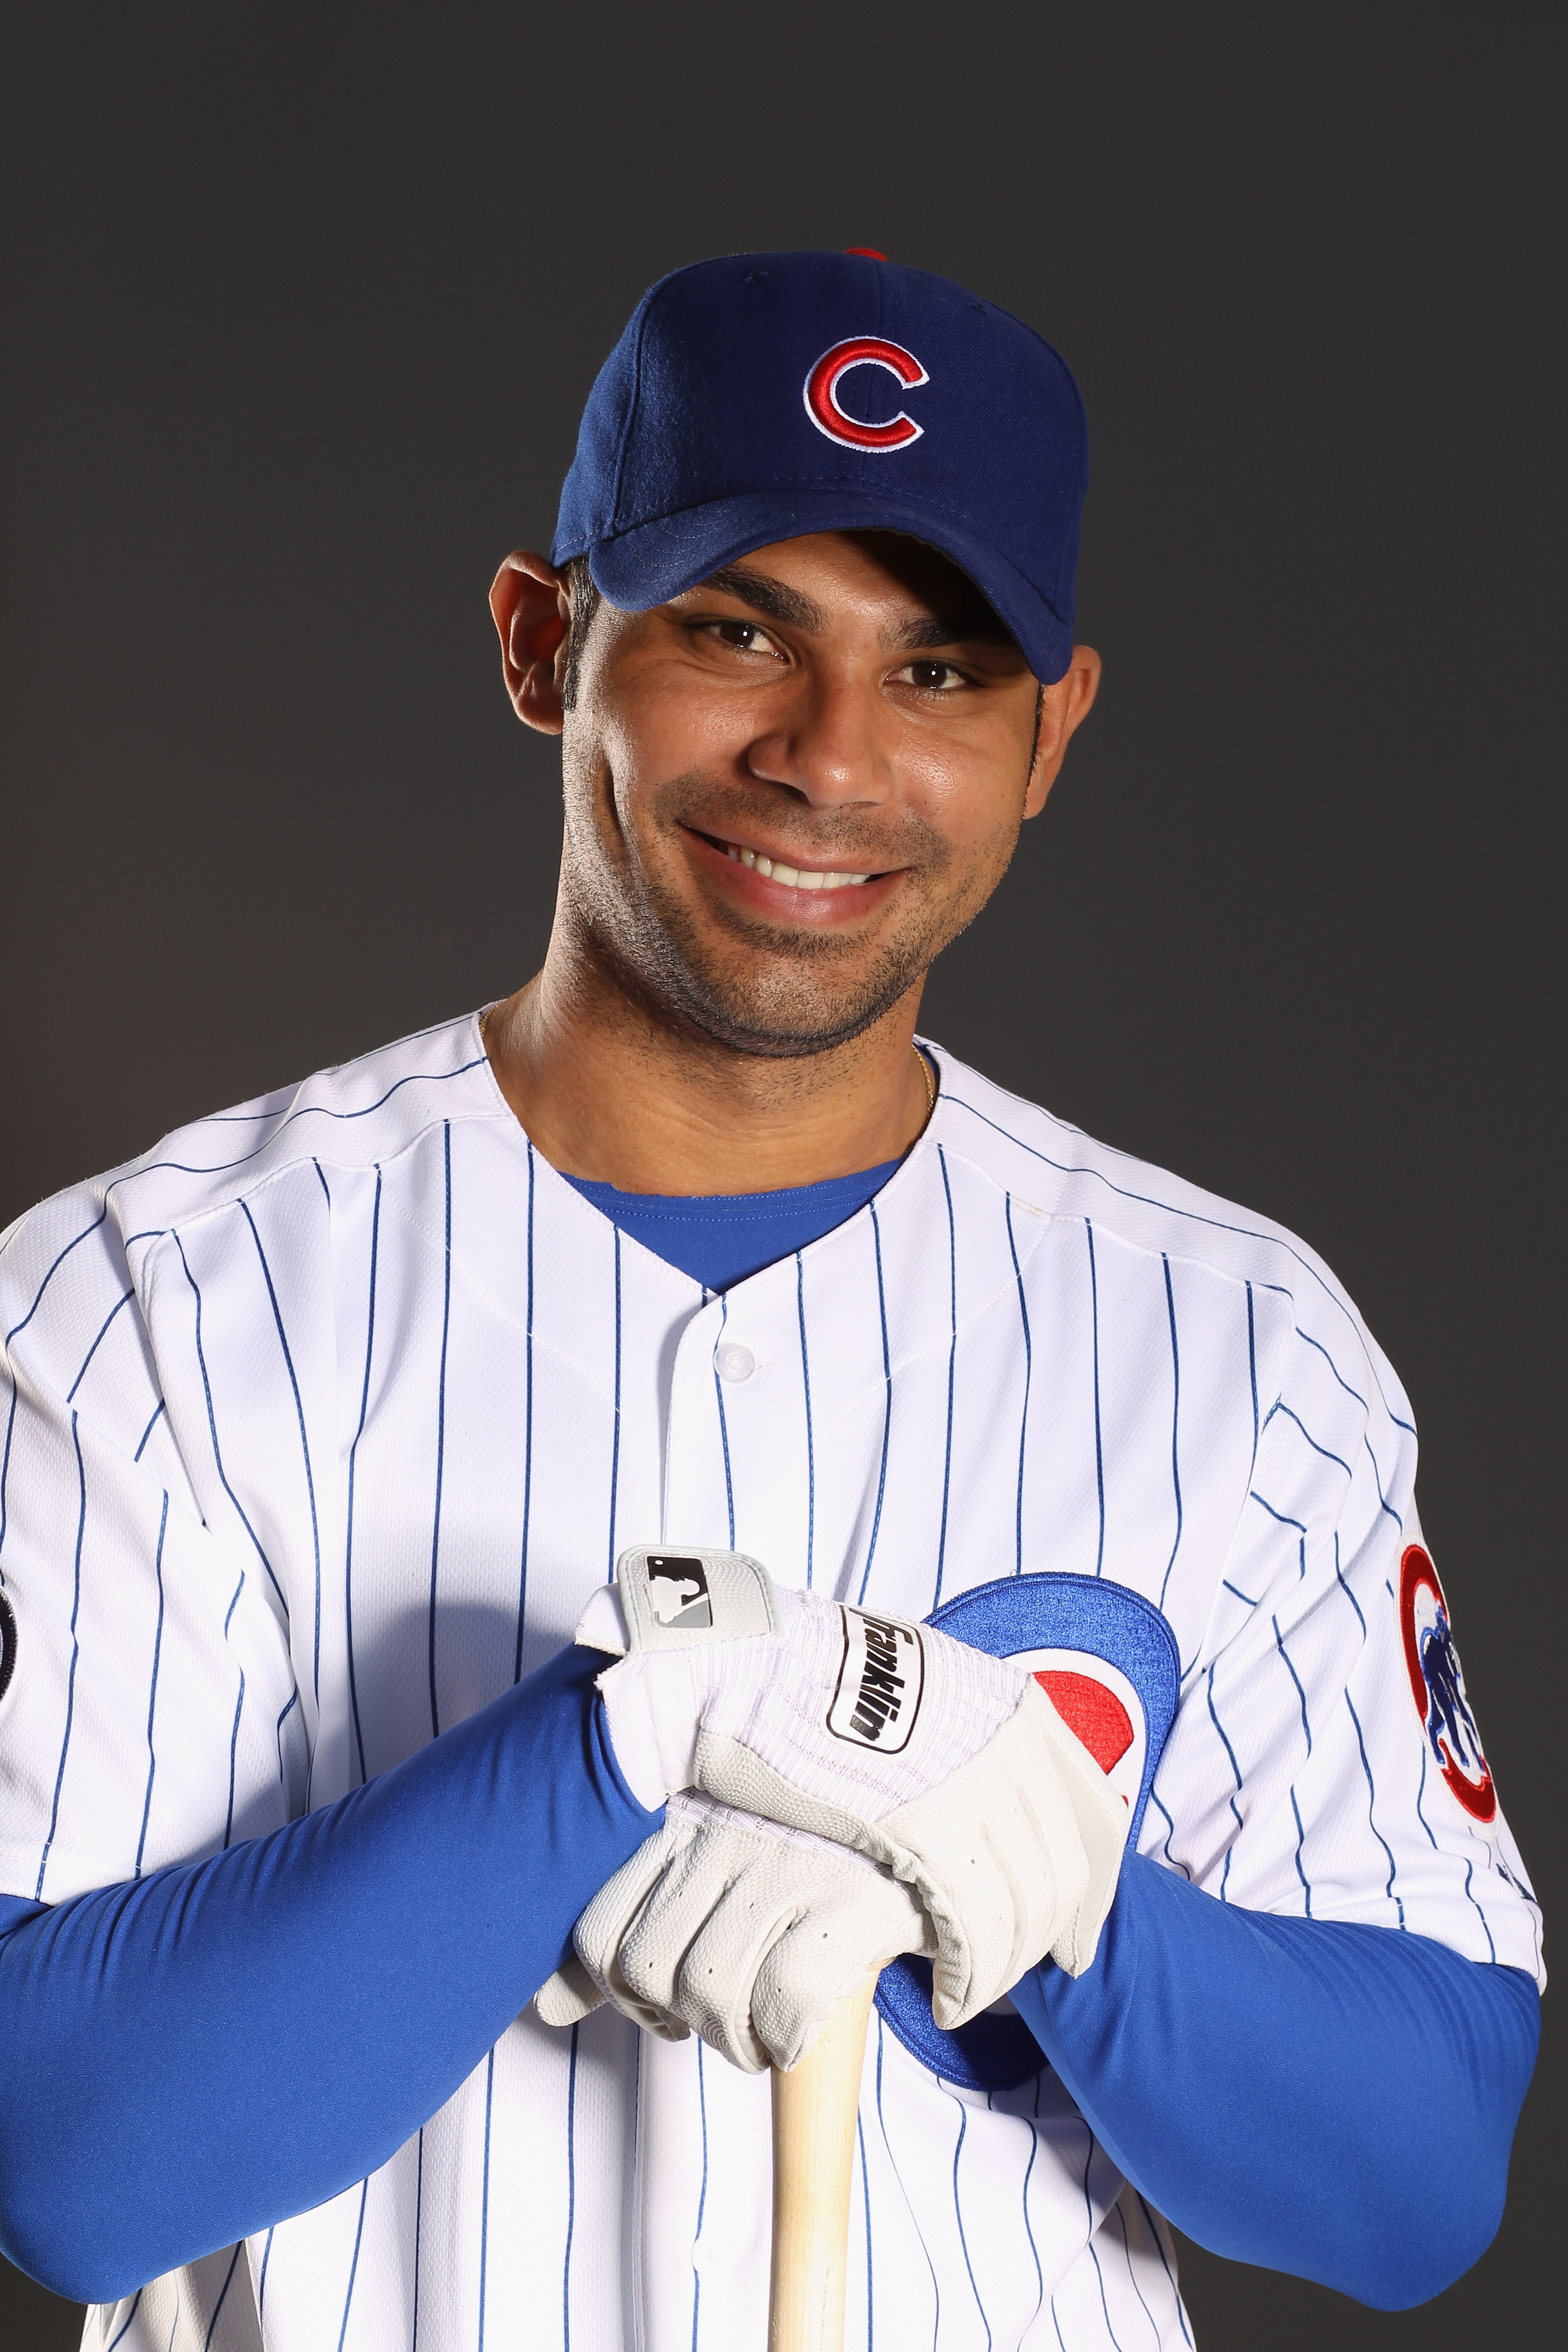 MESA, AZ - FEBRUARY 22:  Carlos Pena of the Chicago Cubs poses for a portrait during media photo day at Finch Park on February 22, 2011 in Mesa, Arizona.  (Photo by Ezra Shaw/Getty Images)